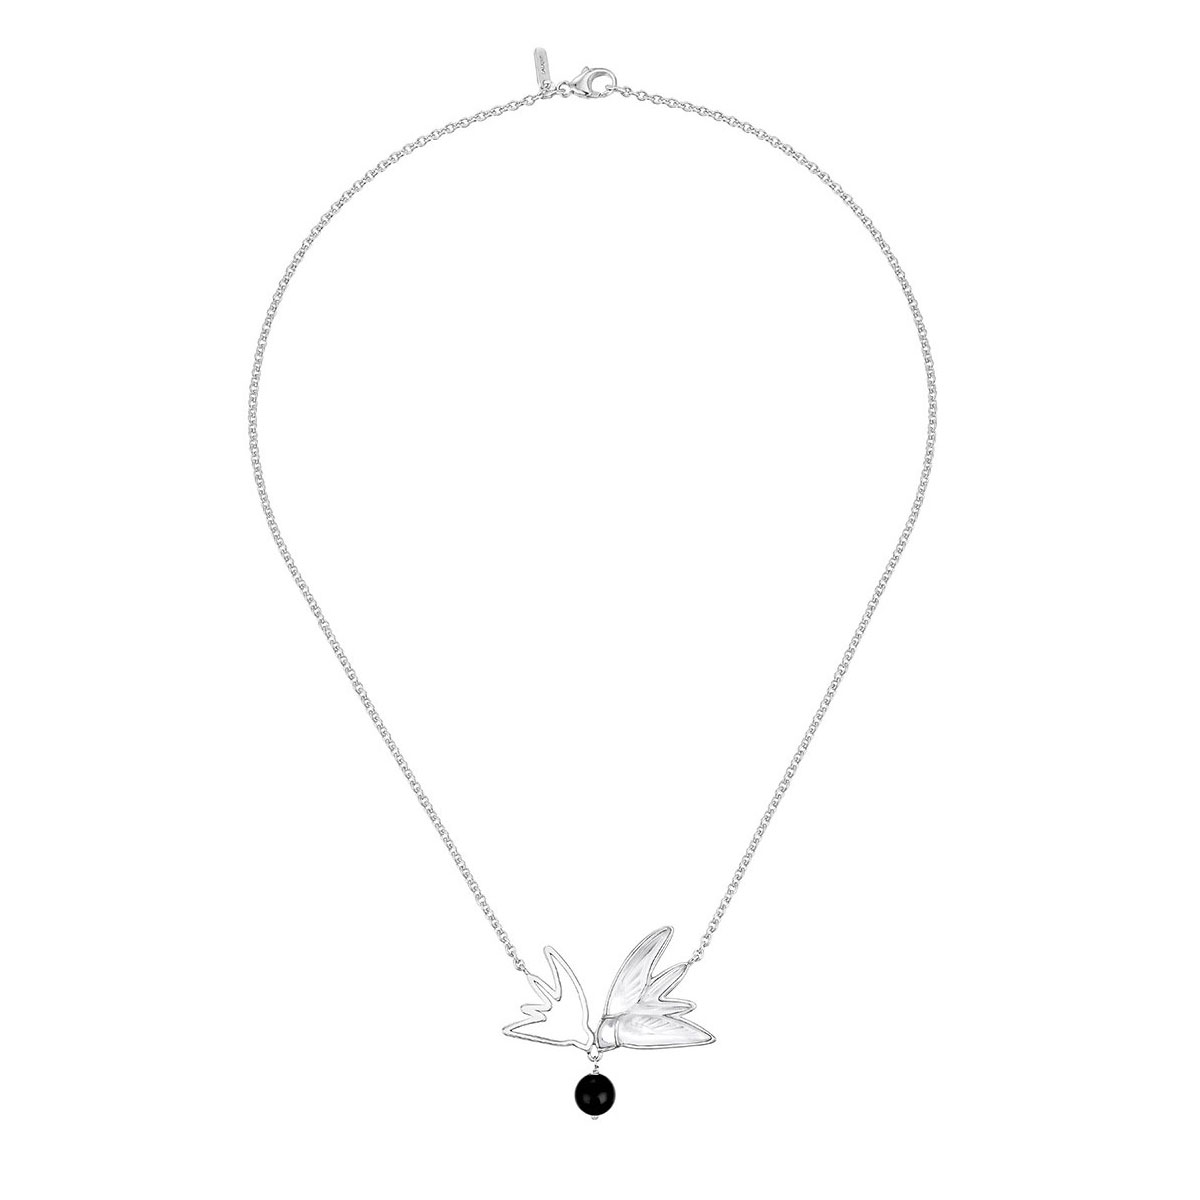 Lalique Hirondelles Sterling Necklace with two Swallows, Clear Crystal with Onyx Bead